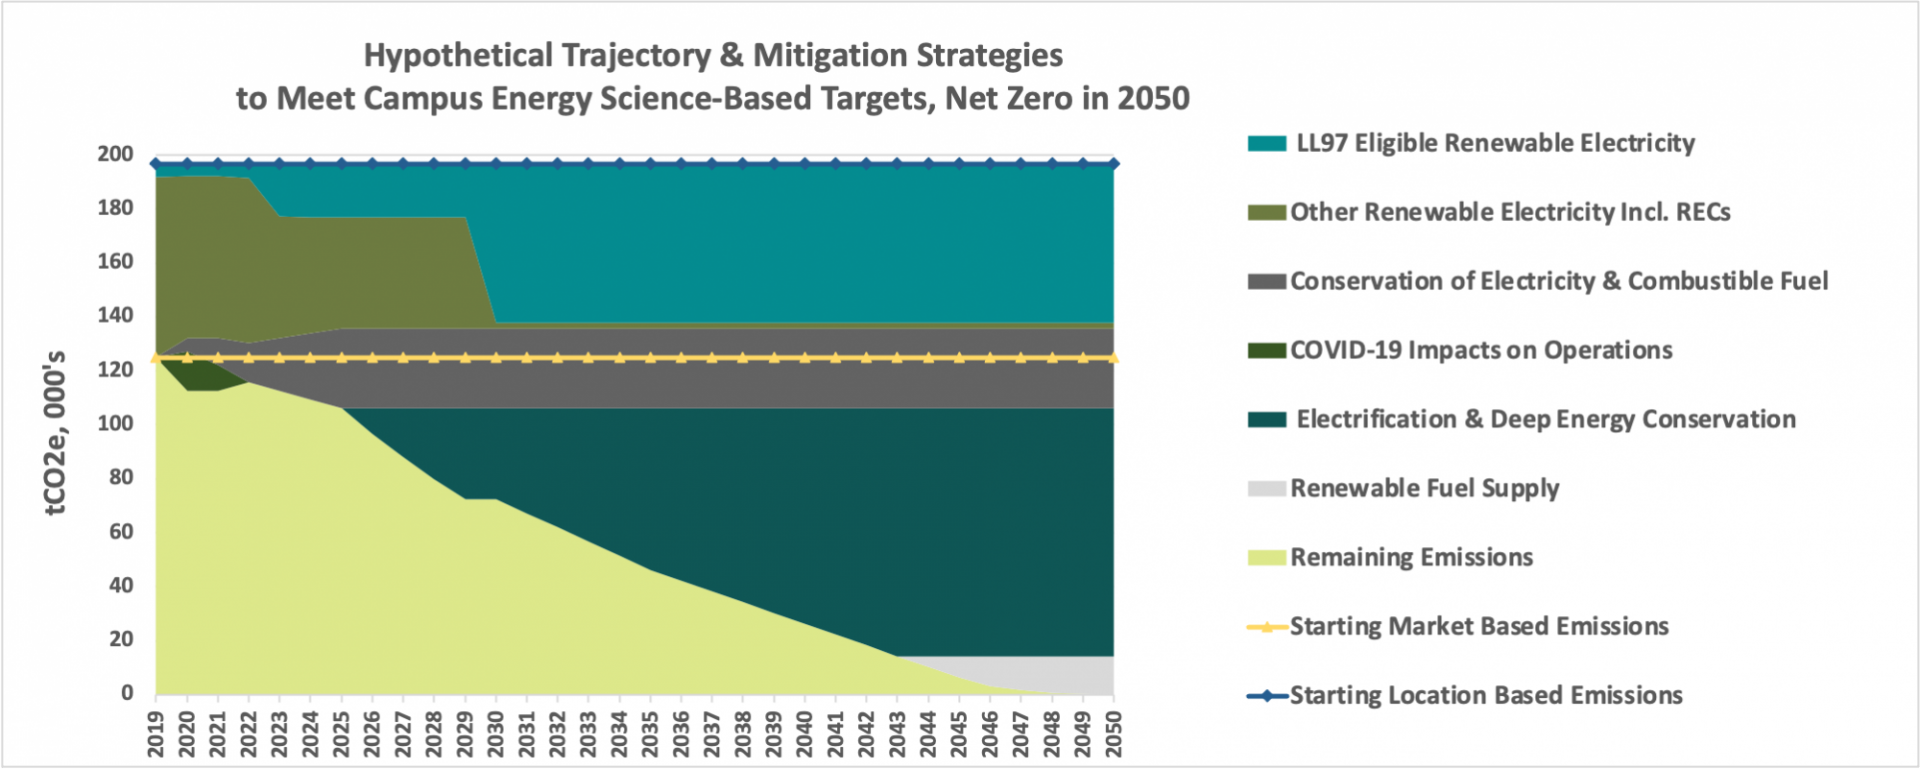 Image Description: Hypothetical application of general mitigation measures to follow the sample trajectory and meet Columbia’s science-based targets.